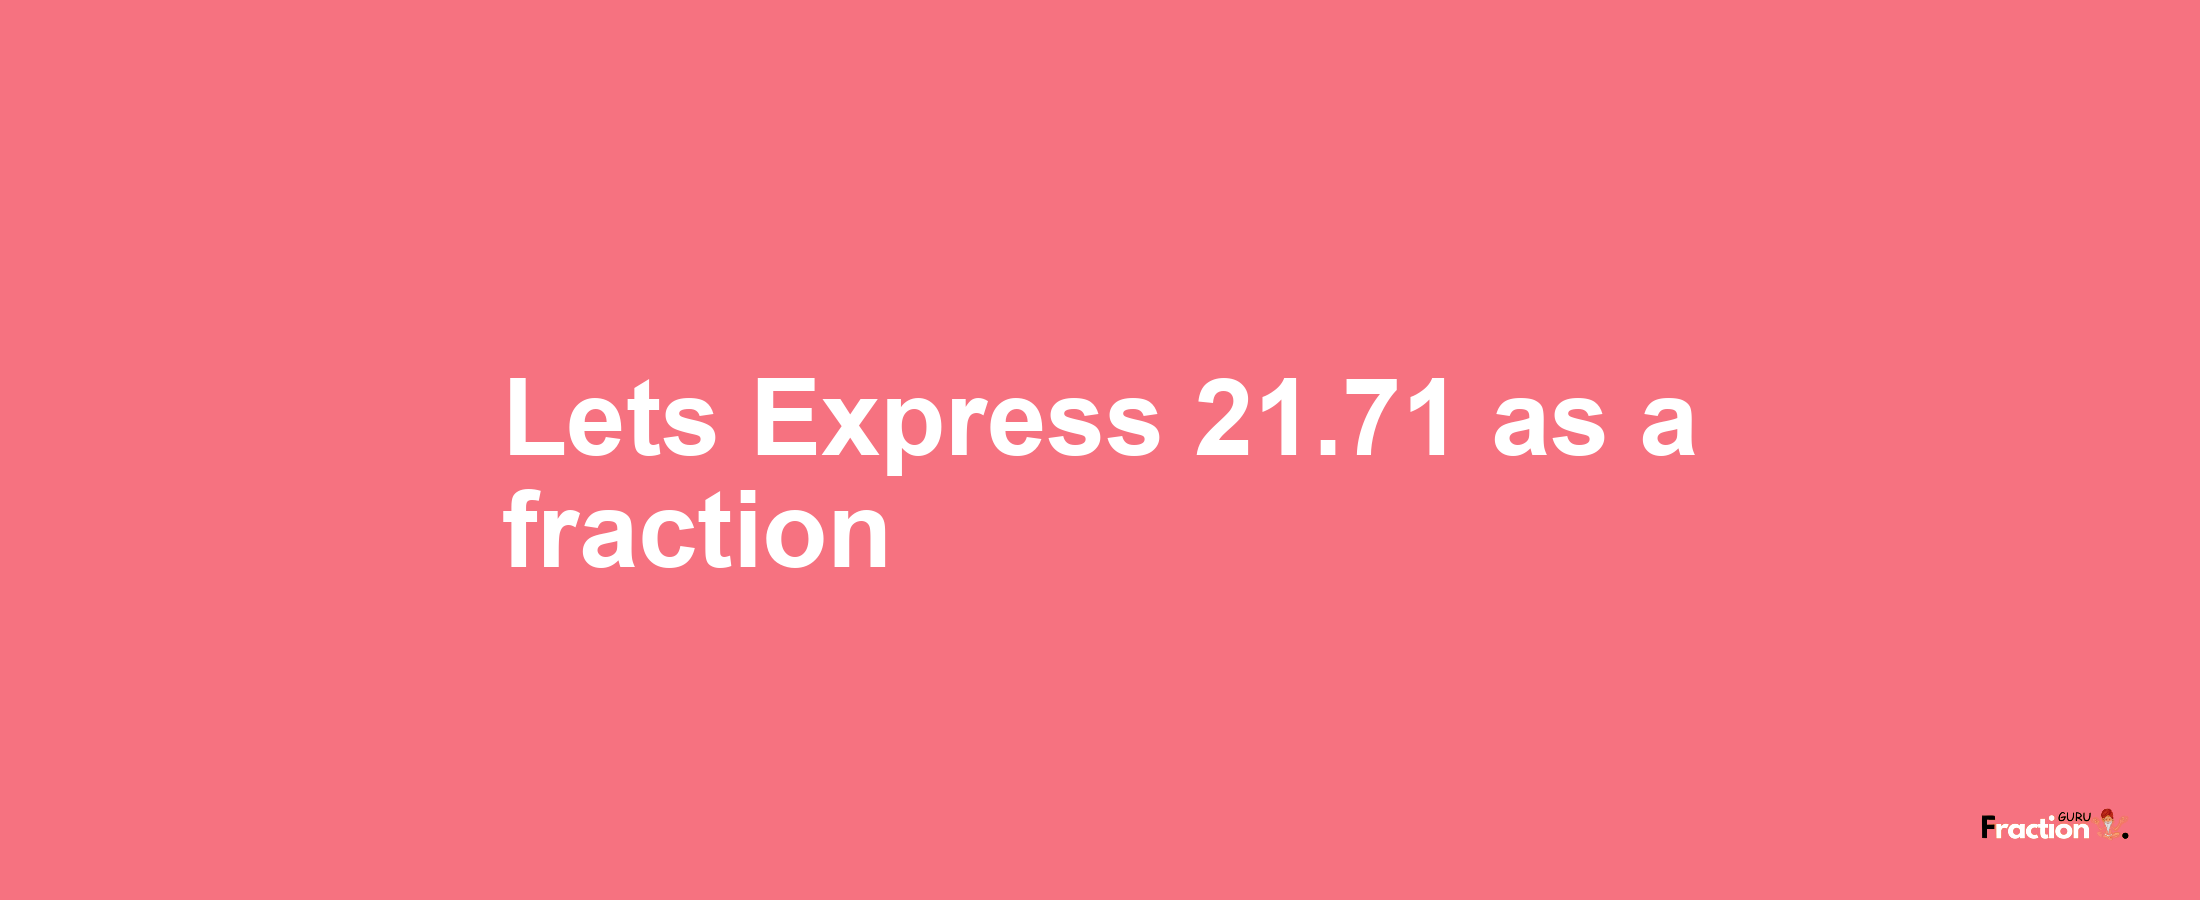 Lets Express 21.71 as afraction